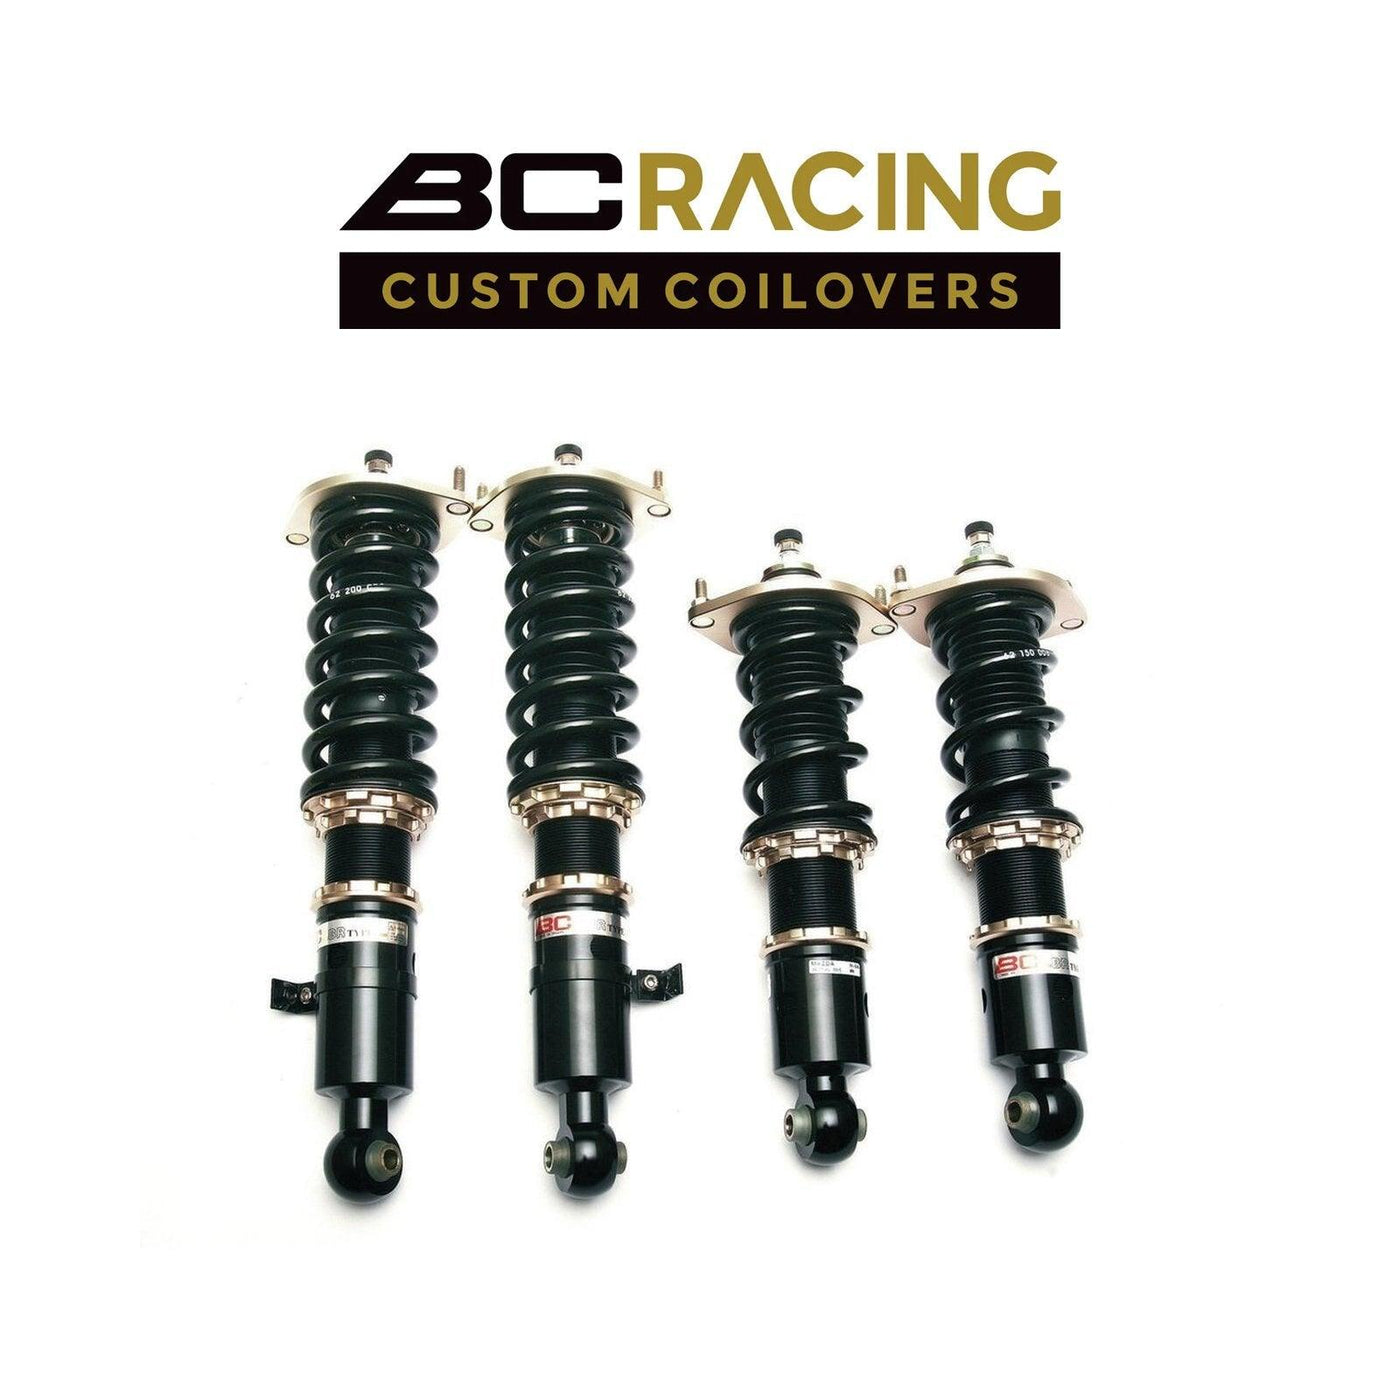 BC Racing Coilovers 2006-2011 FORD Focus MK1.5 (Excl. Wagon) - Attacking the Clock Racing